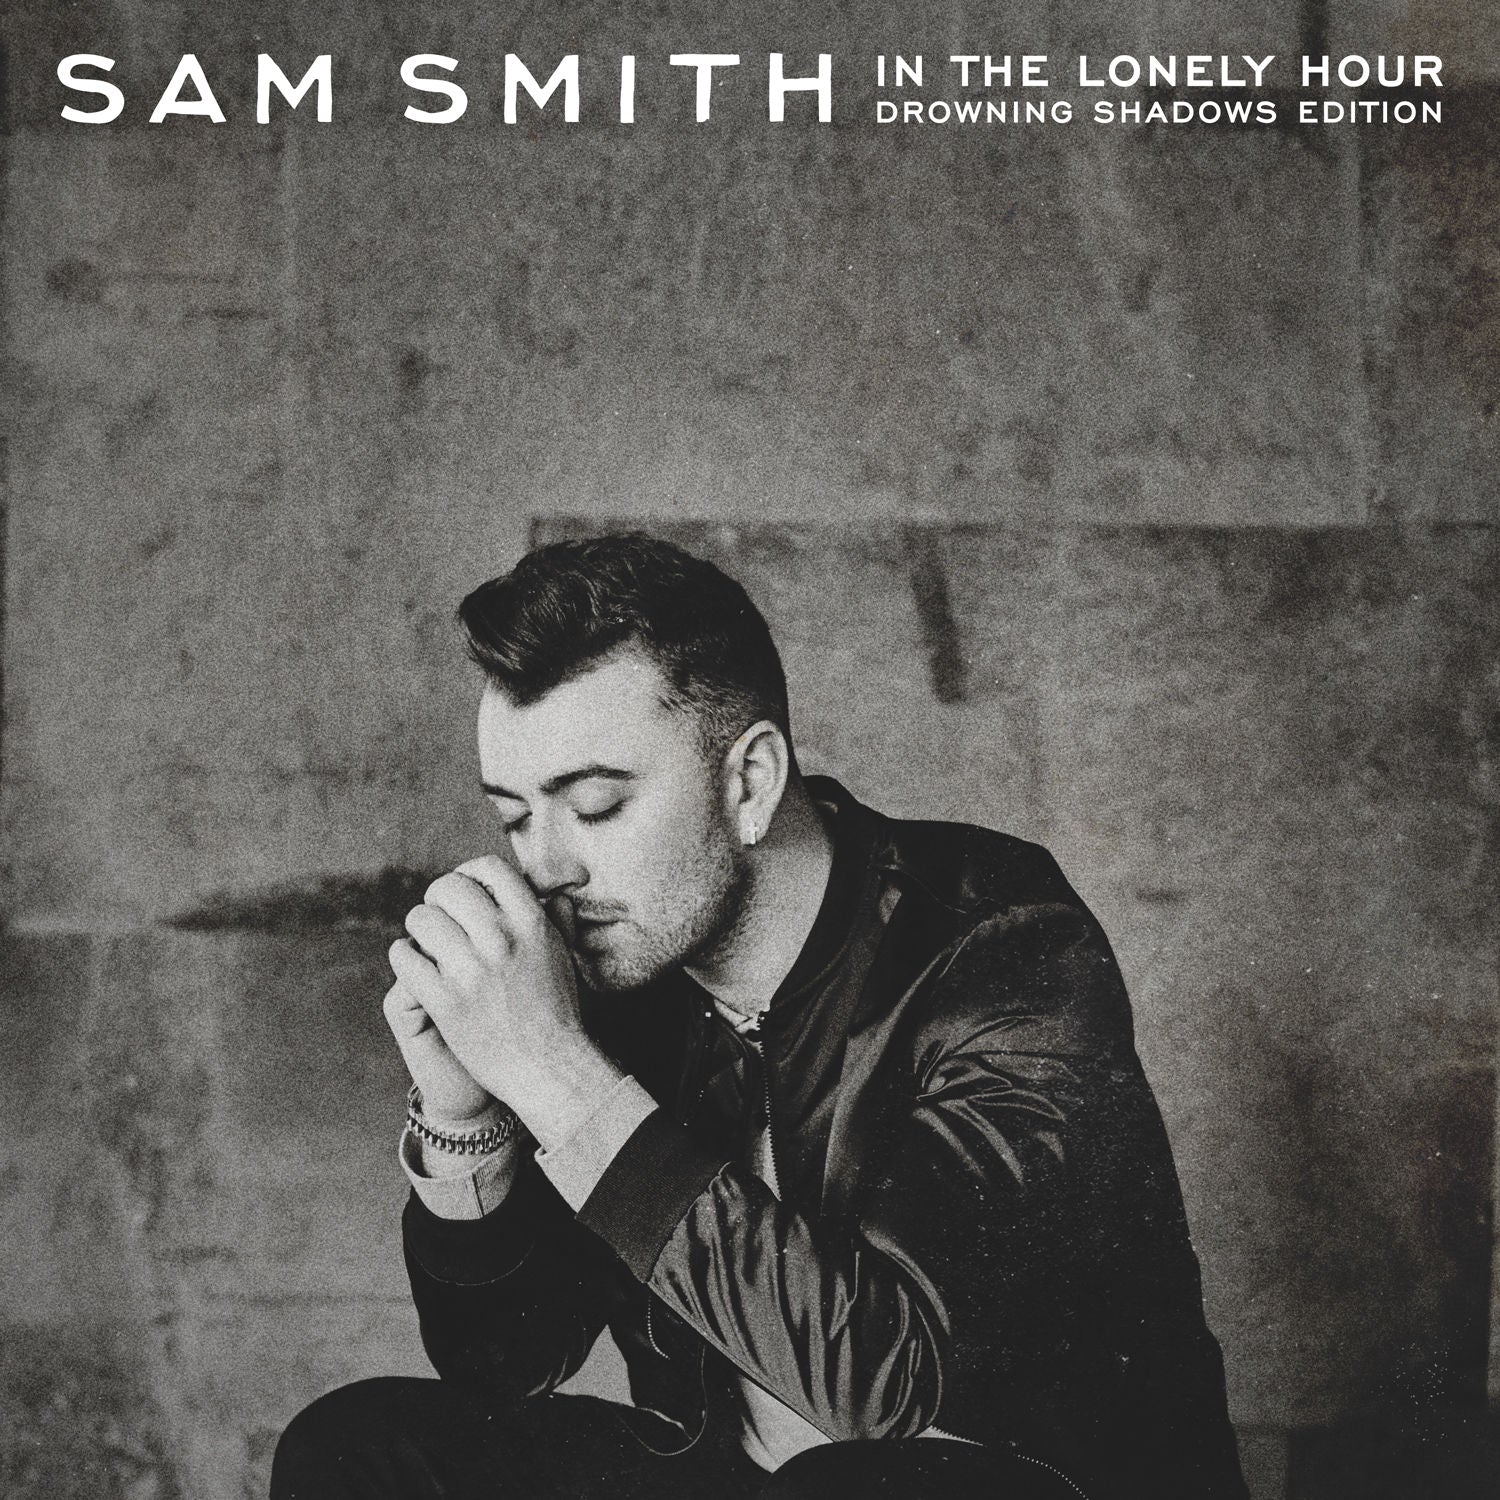 Sam Smith - In The Lonely Hour: Drowning Shadows Edition CD Album